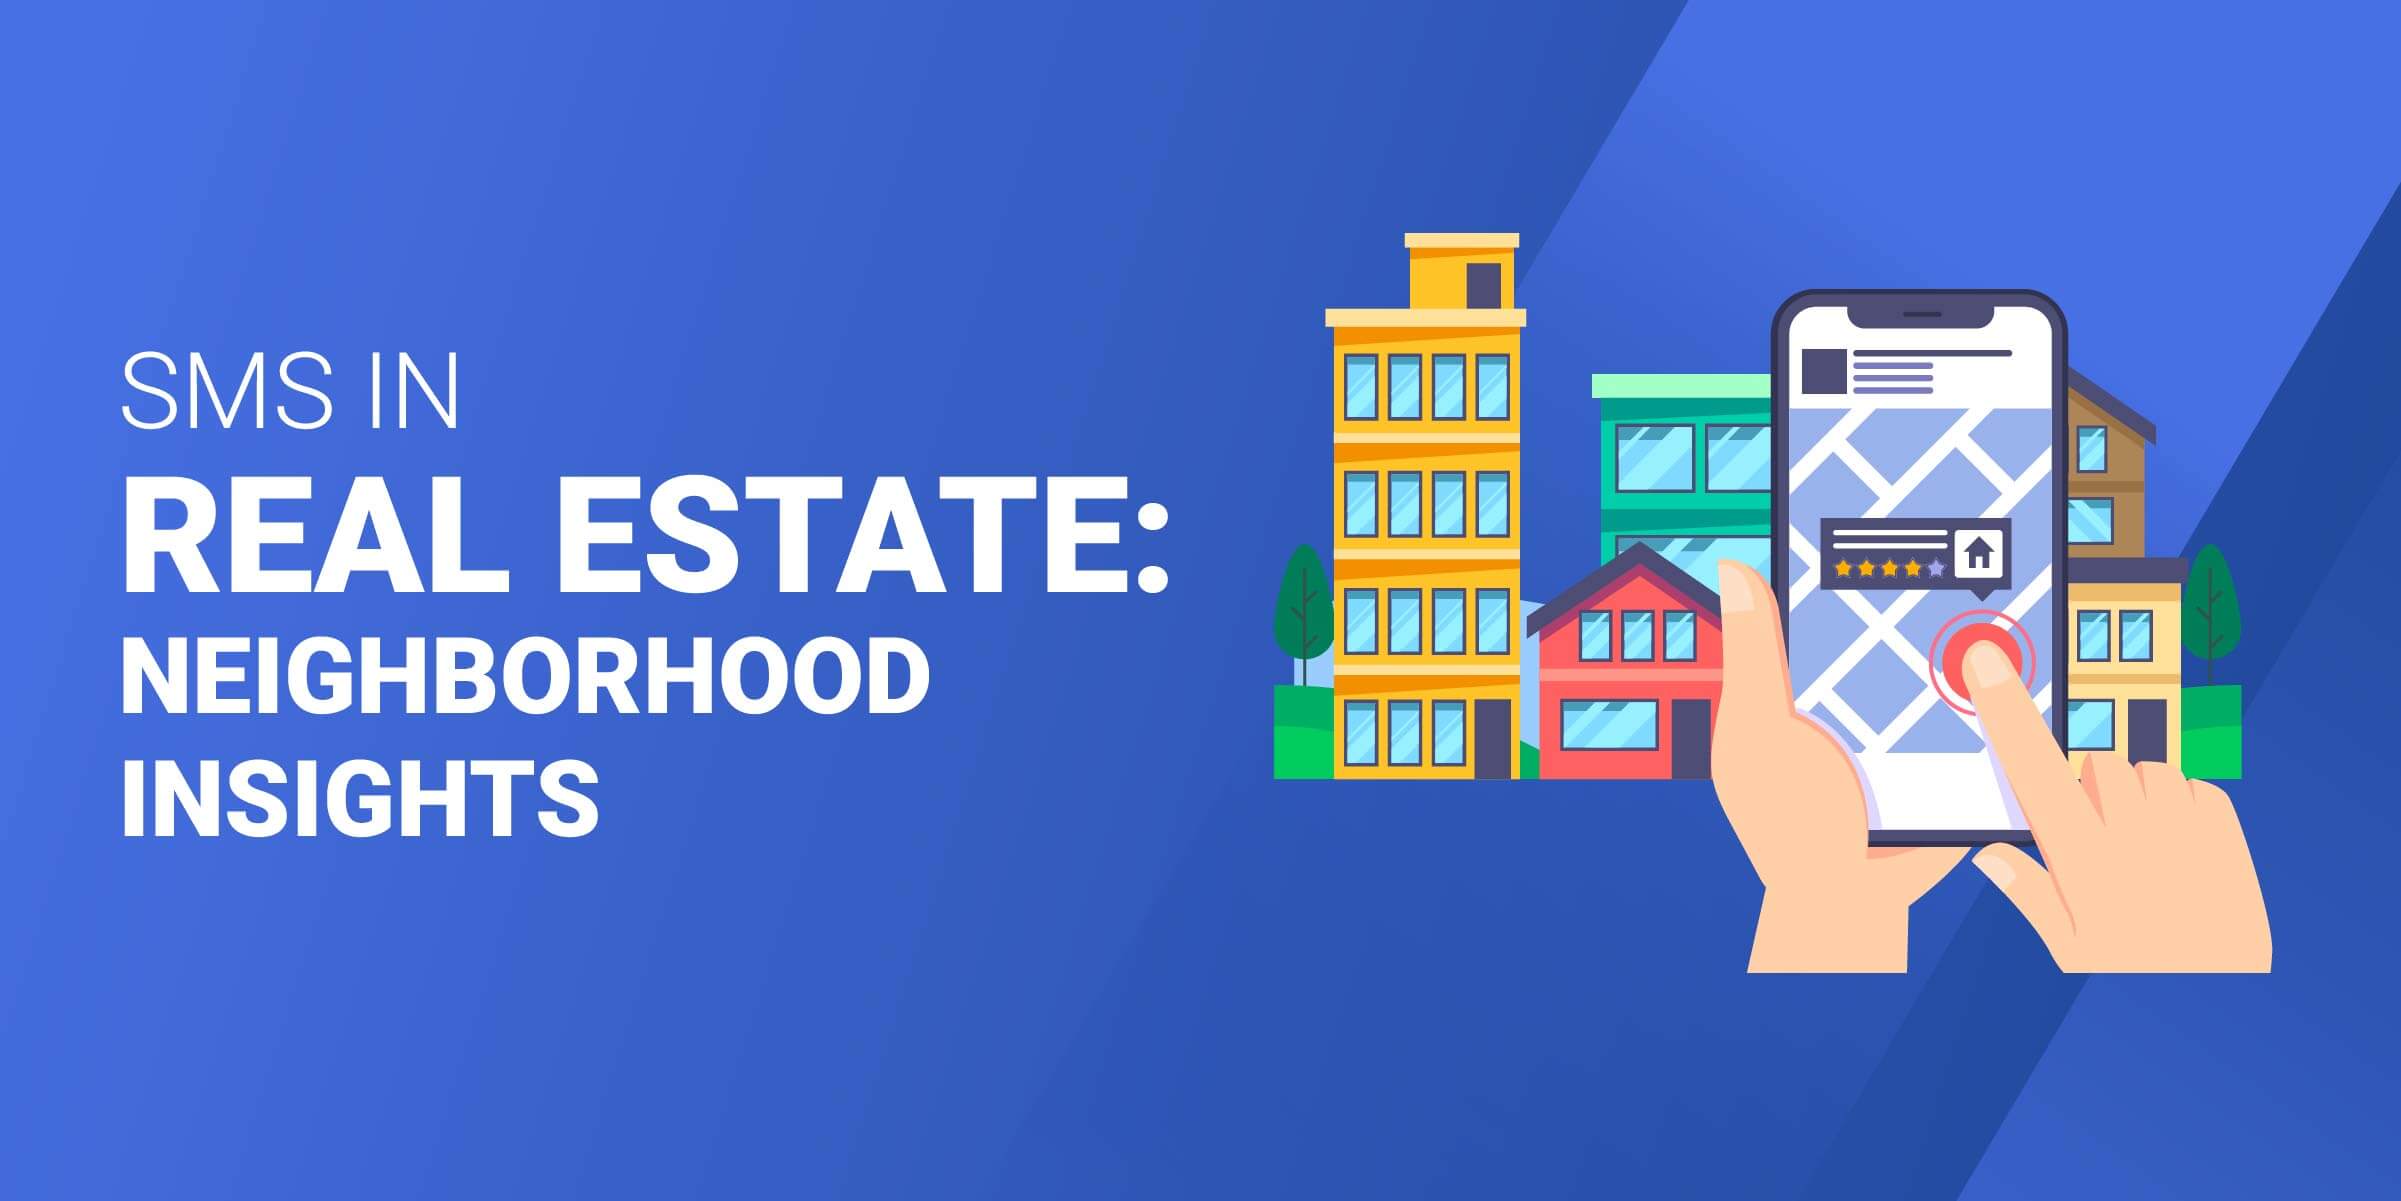 SMS in Real Estate Neighborhood Insights